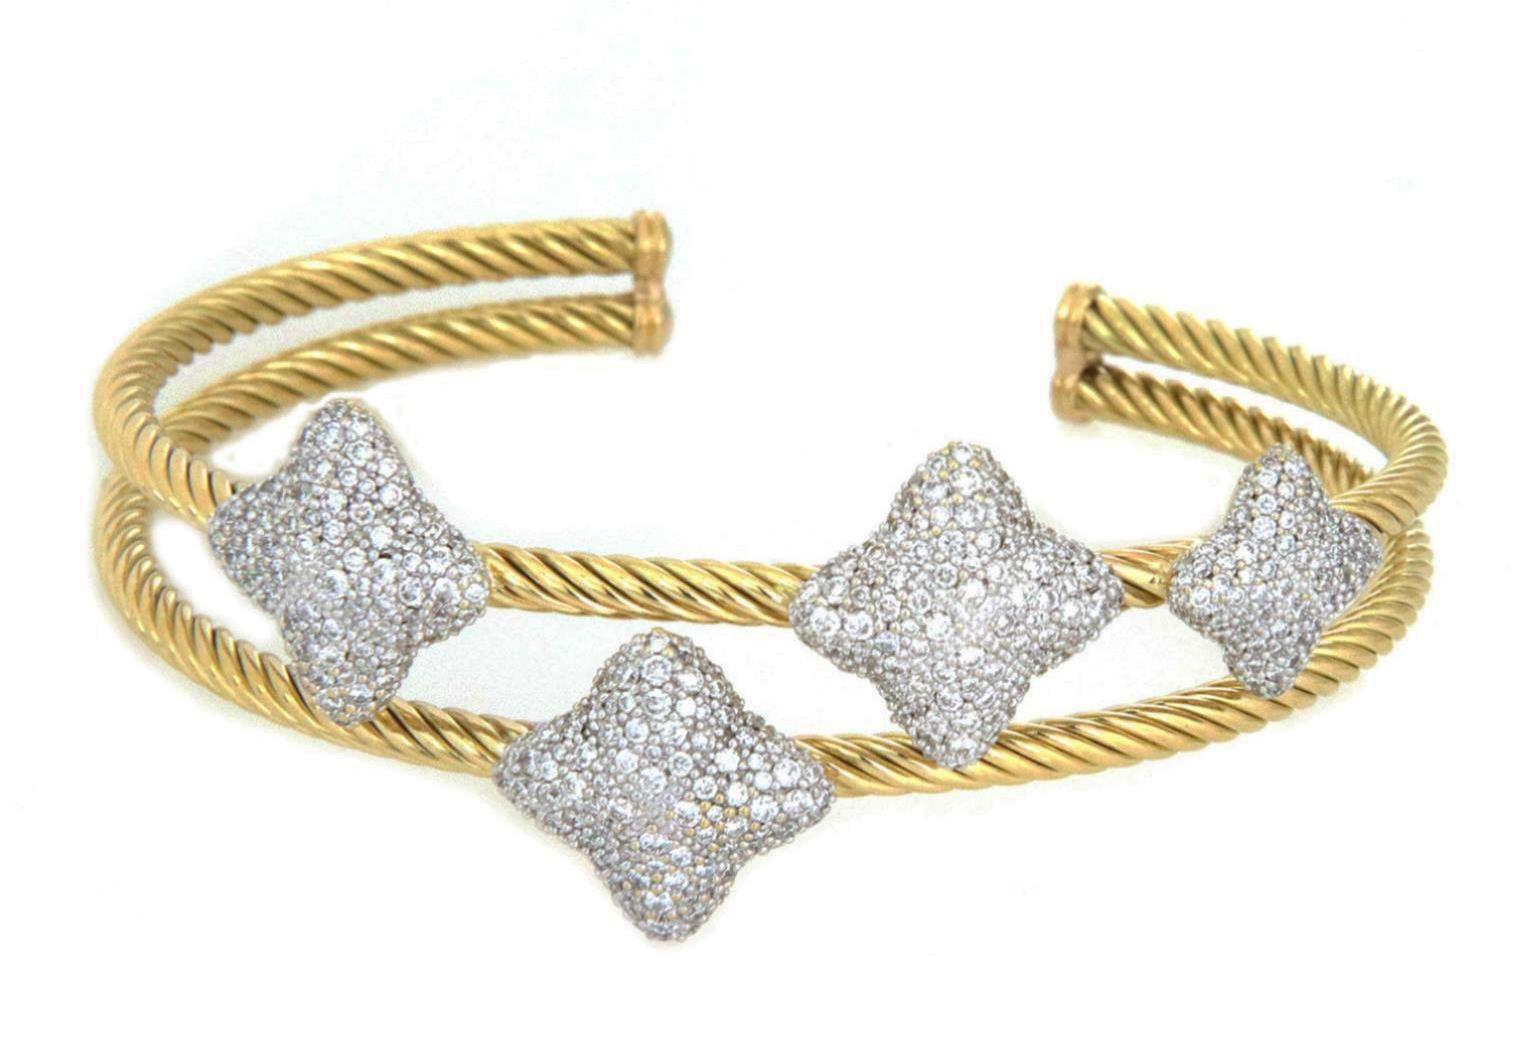 Elite and authentic by David Yurman from his Quatrefoil Collection. This gorgeous cuff bracelet is crafted from 18k yellow and white gold featuring a split double cable wire band in the cuff style. Attached to one cable band on the front center are